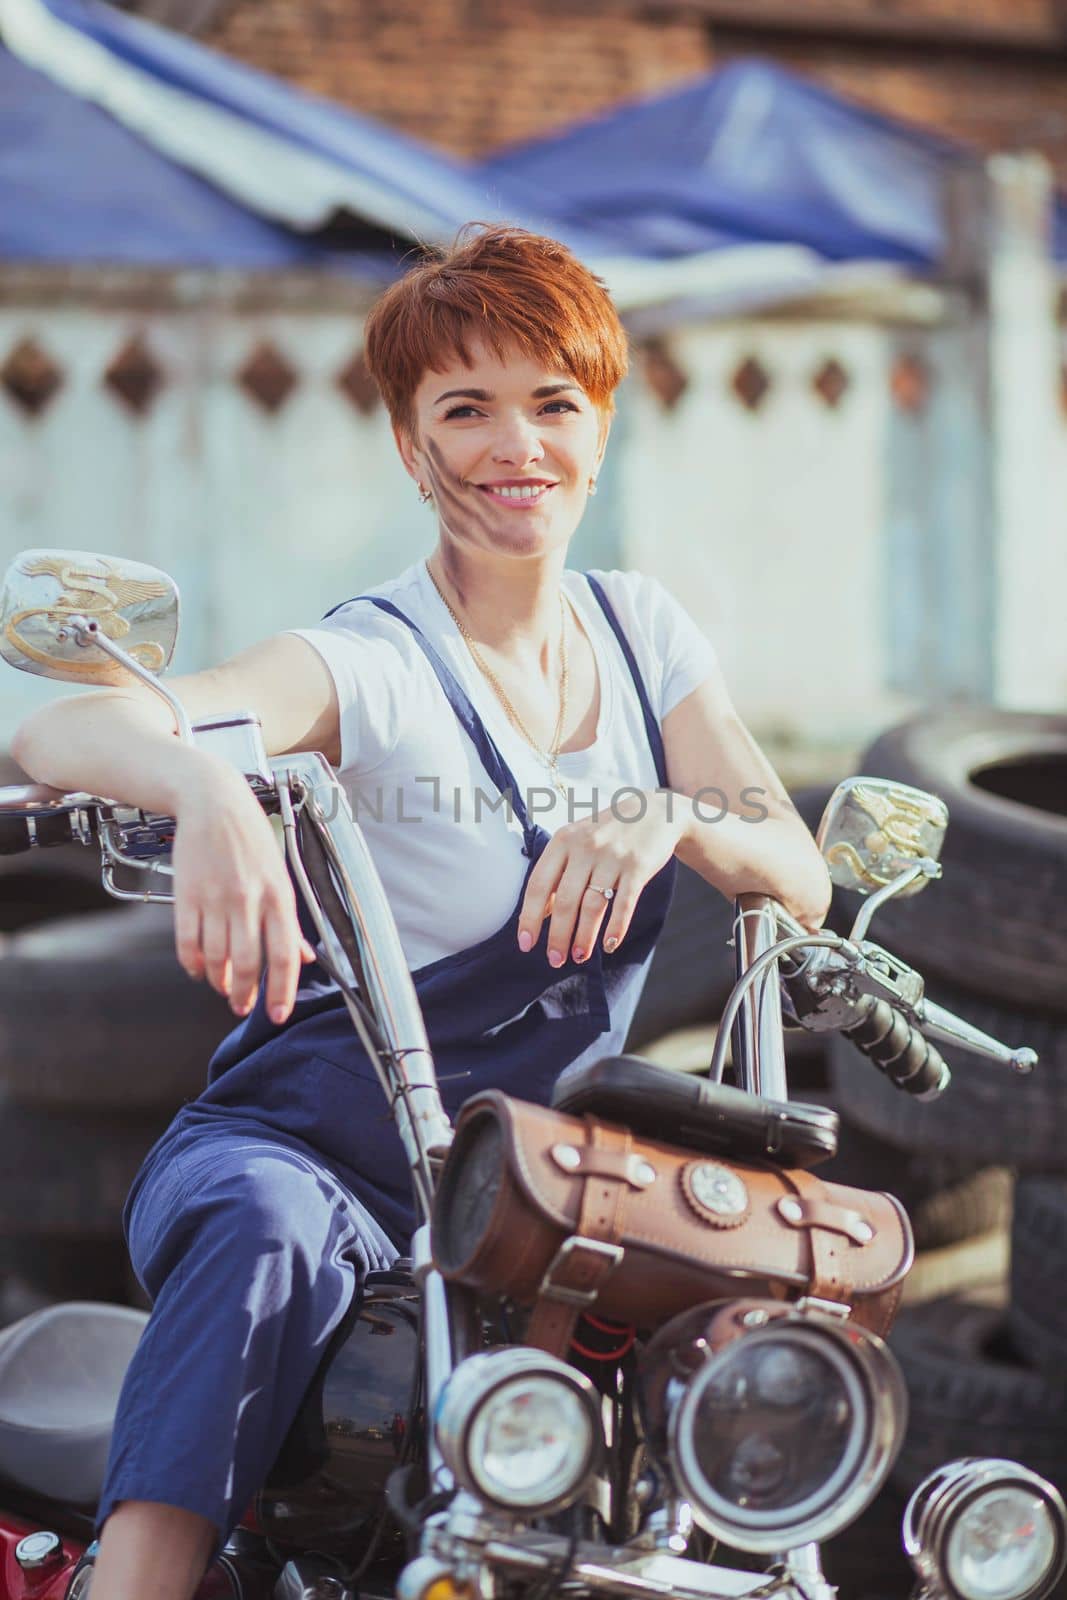 Girl auto mechanic smiling on a motorcycle.